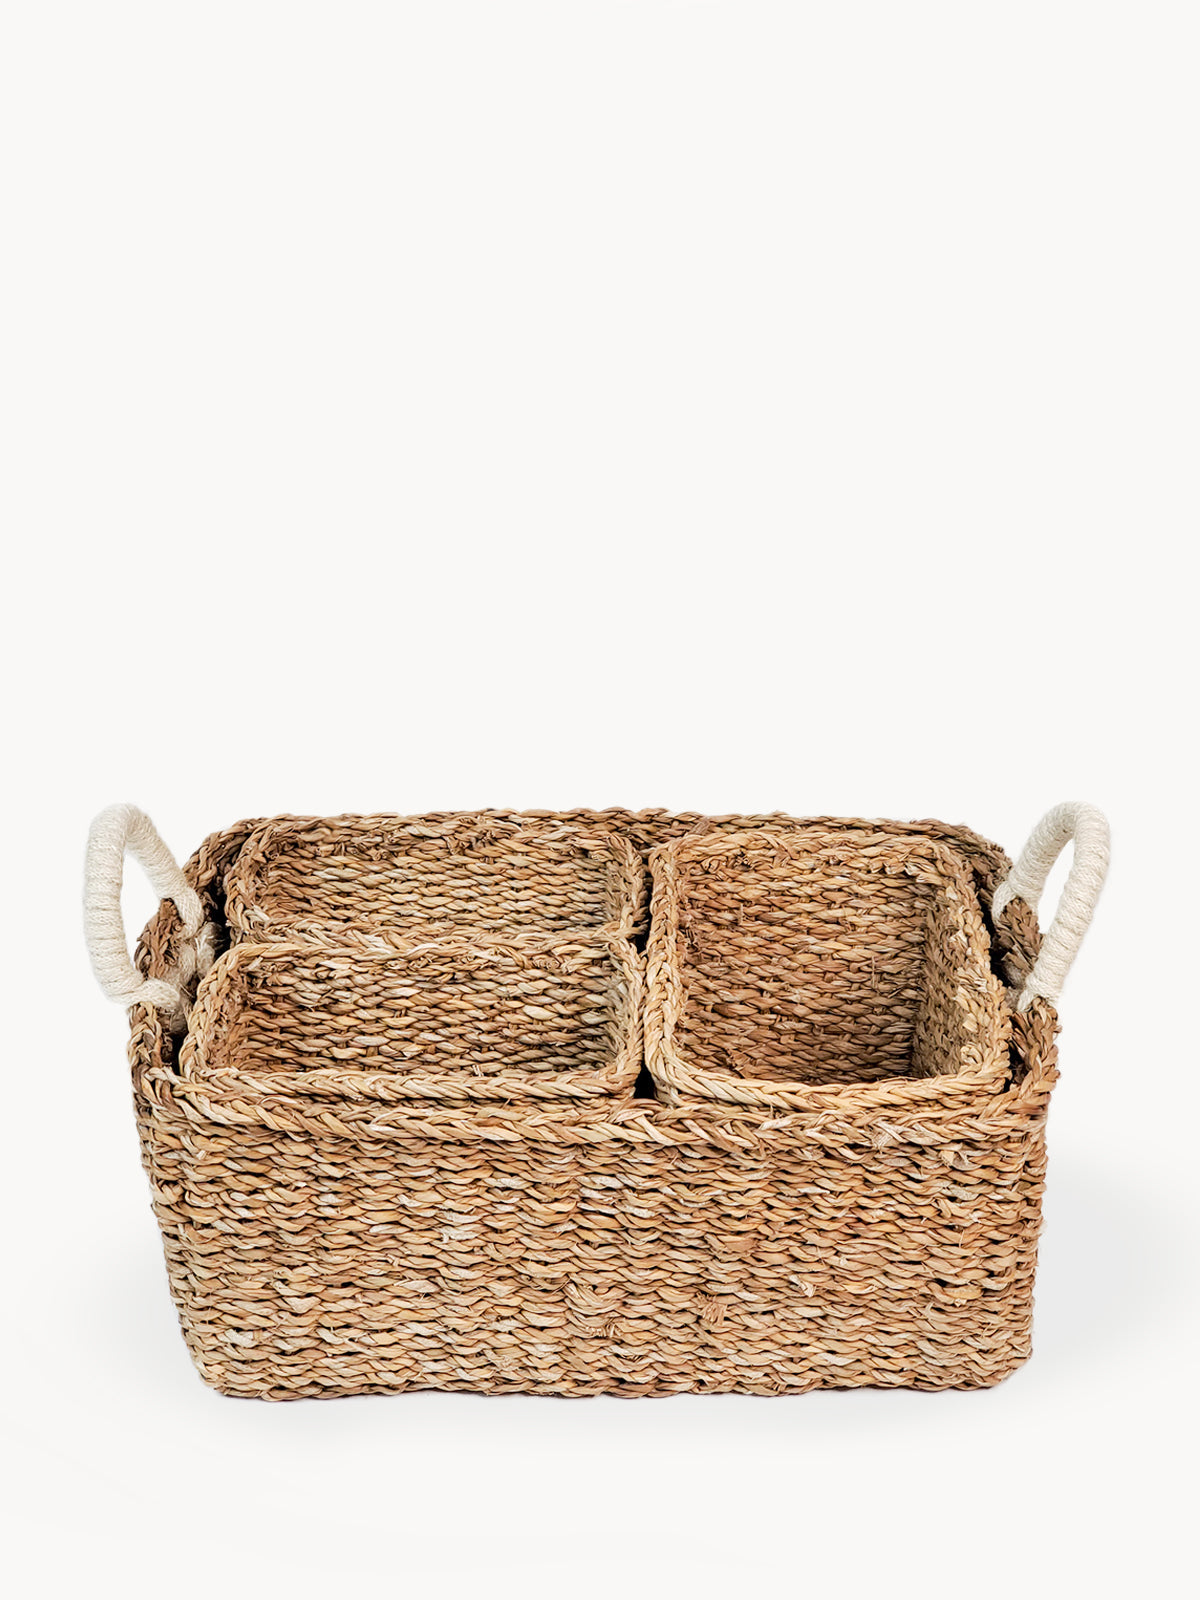 Stylish - with hand rope jute wool - and multifunctional use for everything from a picnic basket to organizing cosmetics, art and crafts, utensils, and small household items.